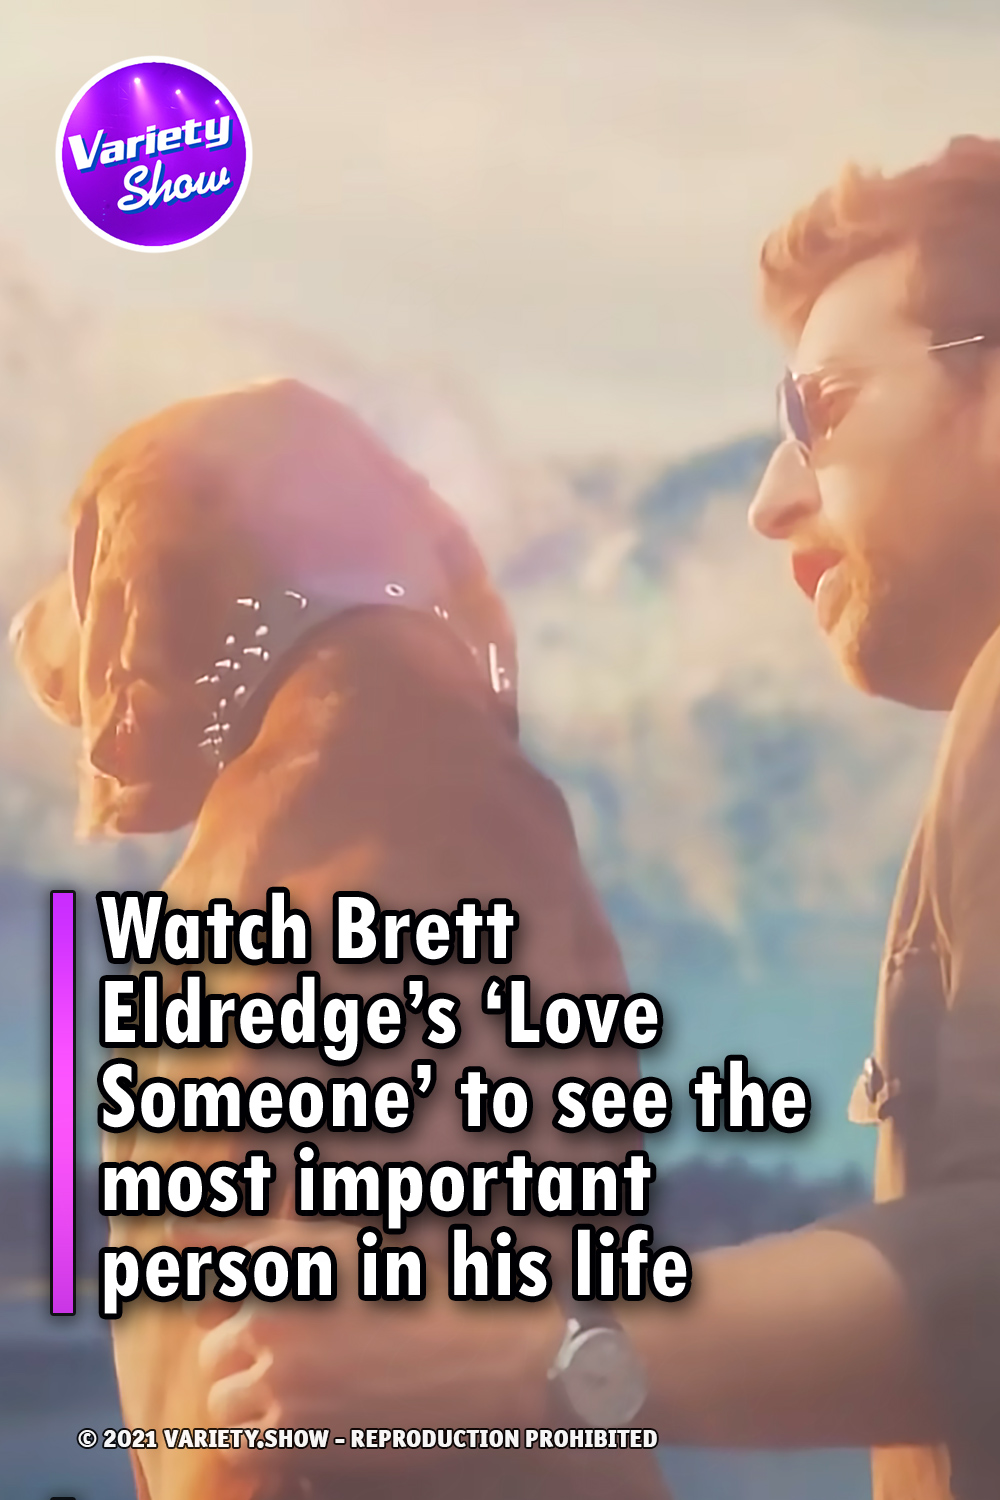 Watch Brett Eldredge’s ‘Love Someone’ to see the most important person in his life